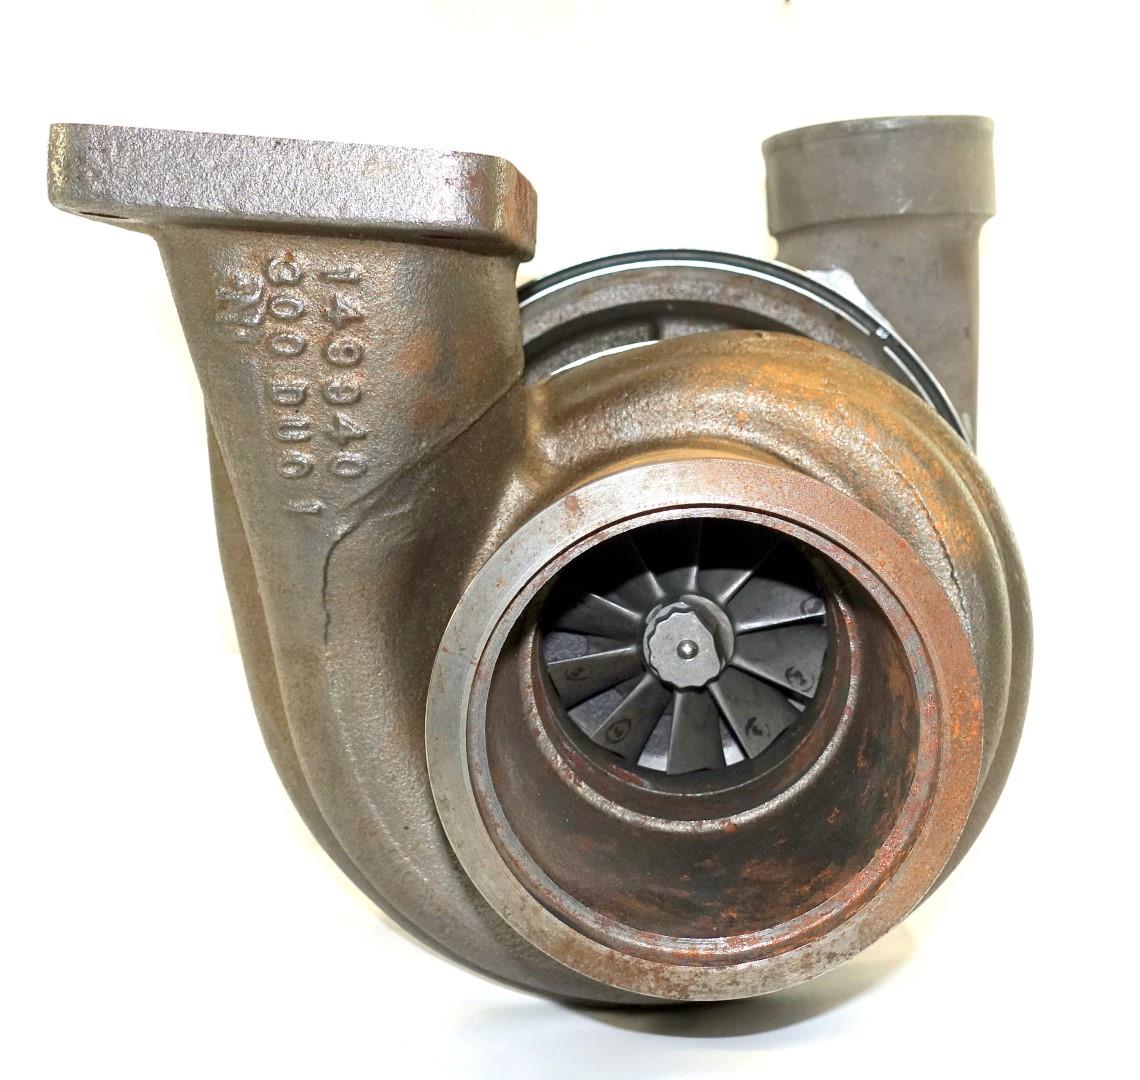 5T-966 | 2950-00-178-1245 M54 Series Turbo Charger (7) (Large).JPG